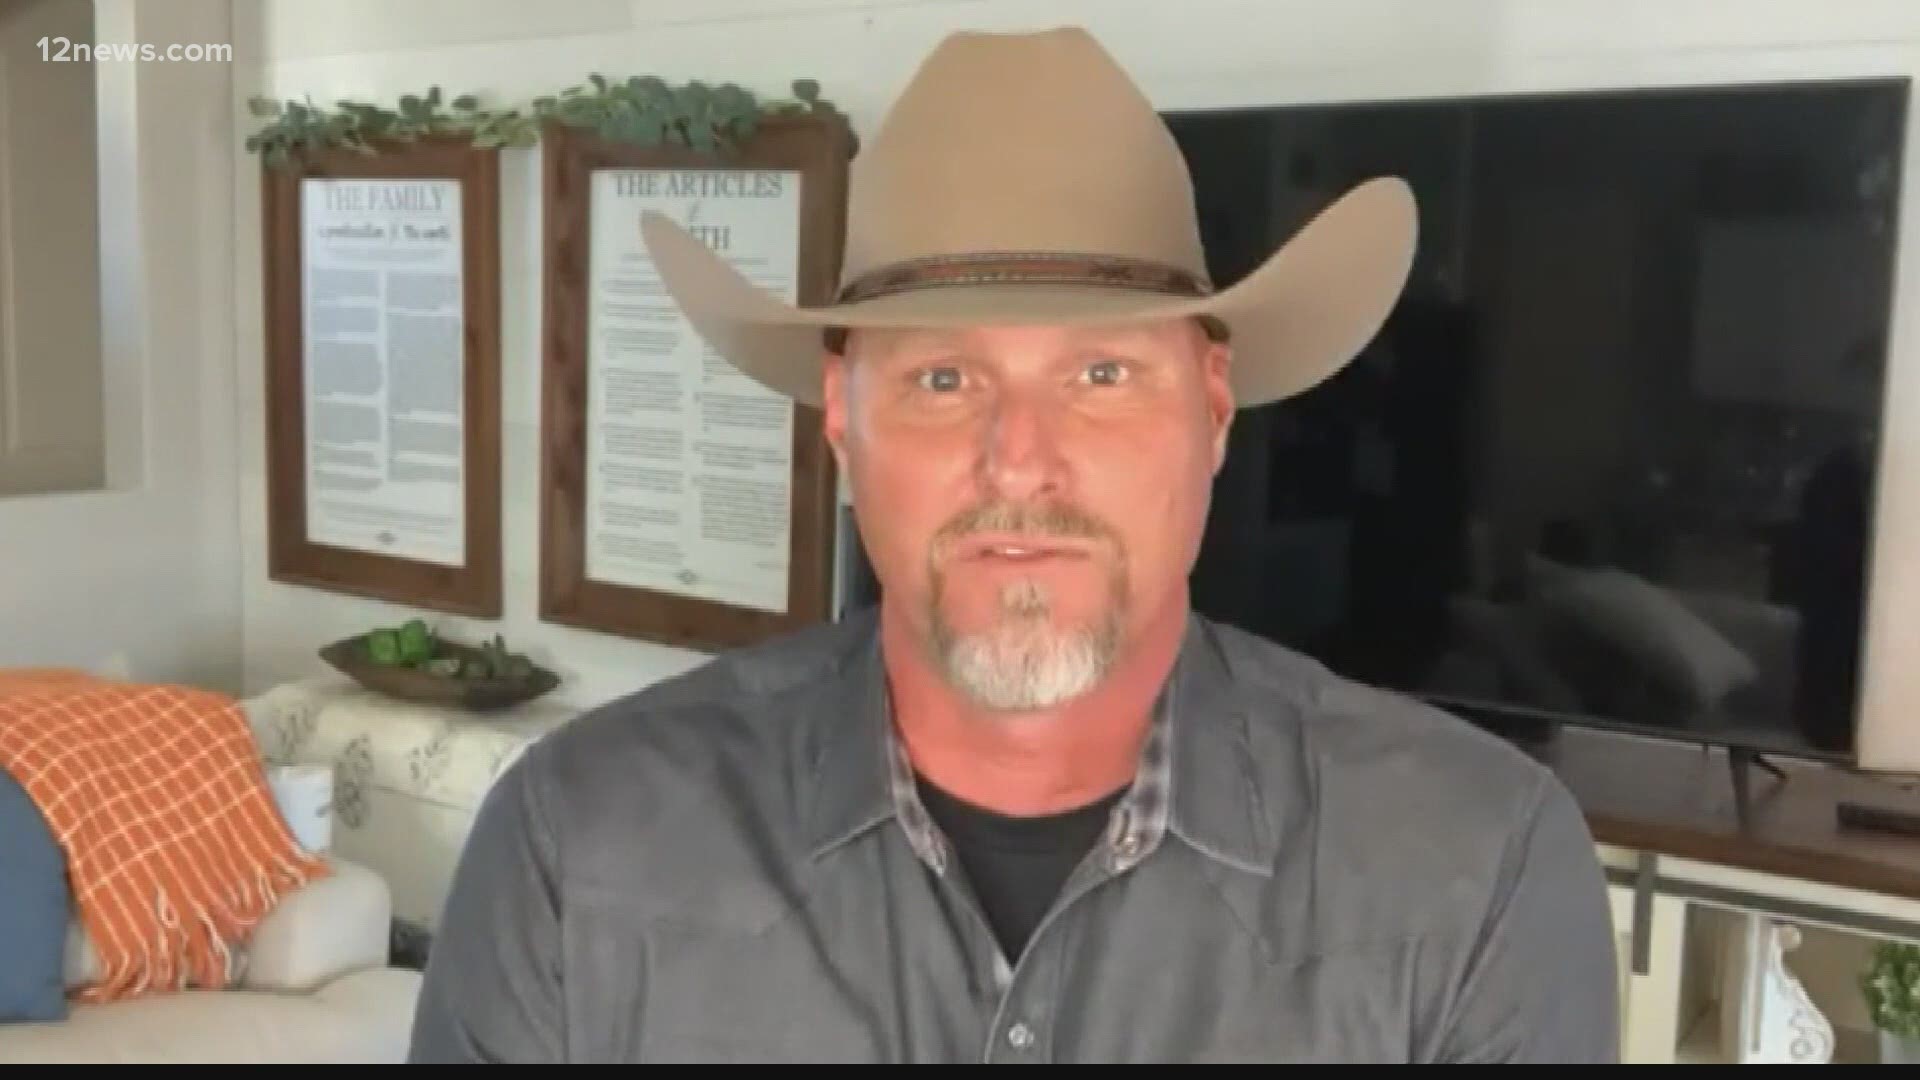 Pinal County Sheriff Mark Lamb is hosting an internet show that takes viewers on ride-alongs. Viewers can watch the show if they pay a subscription fee.